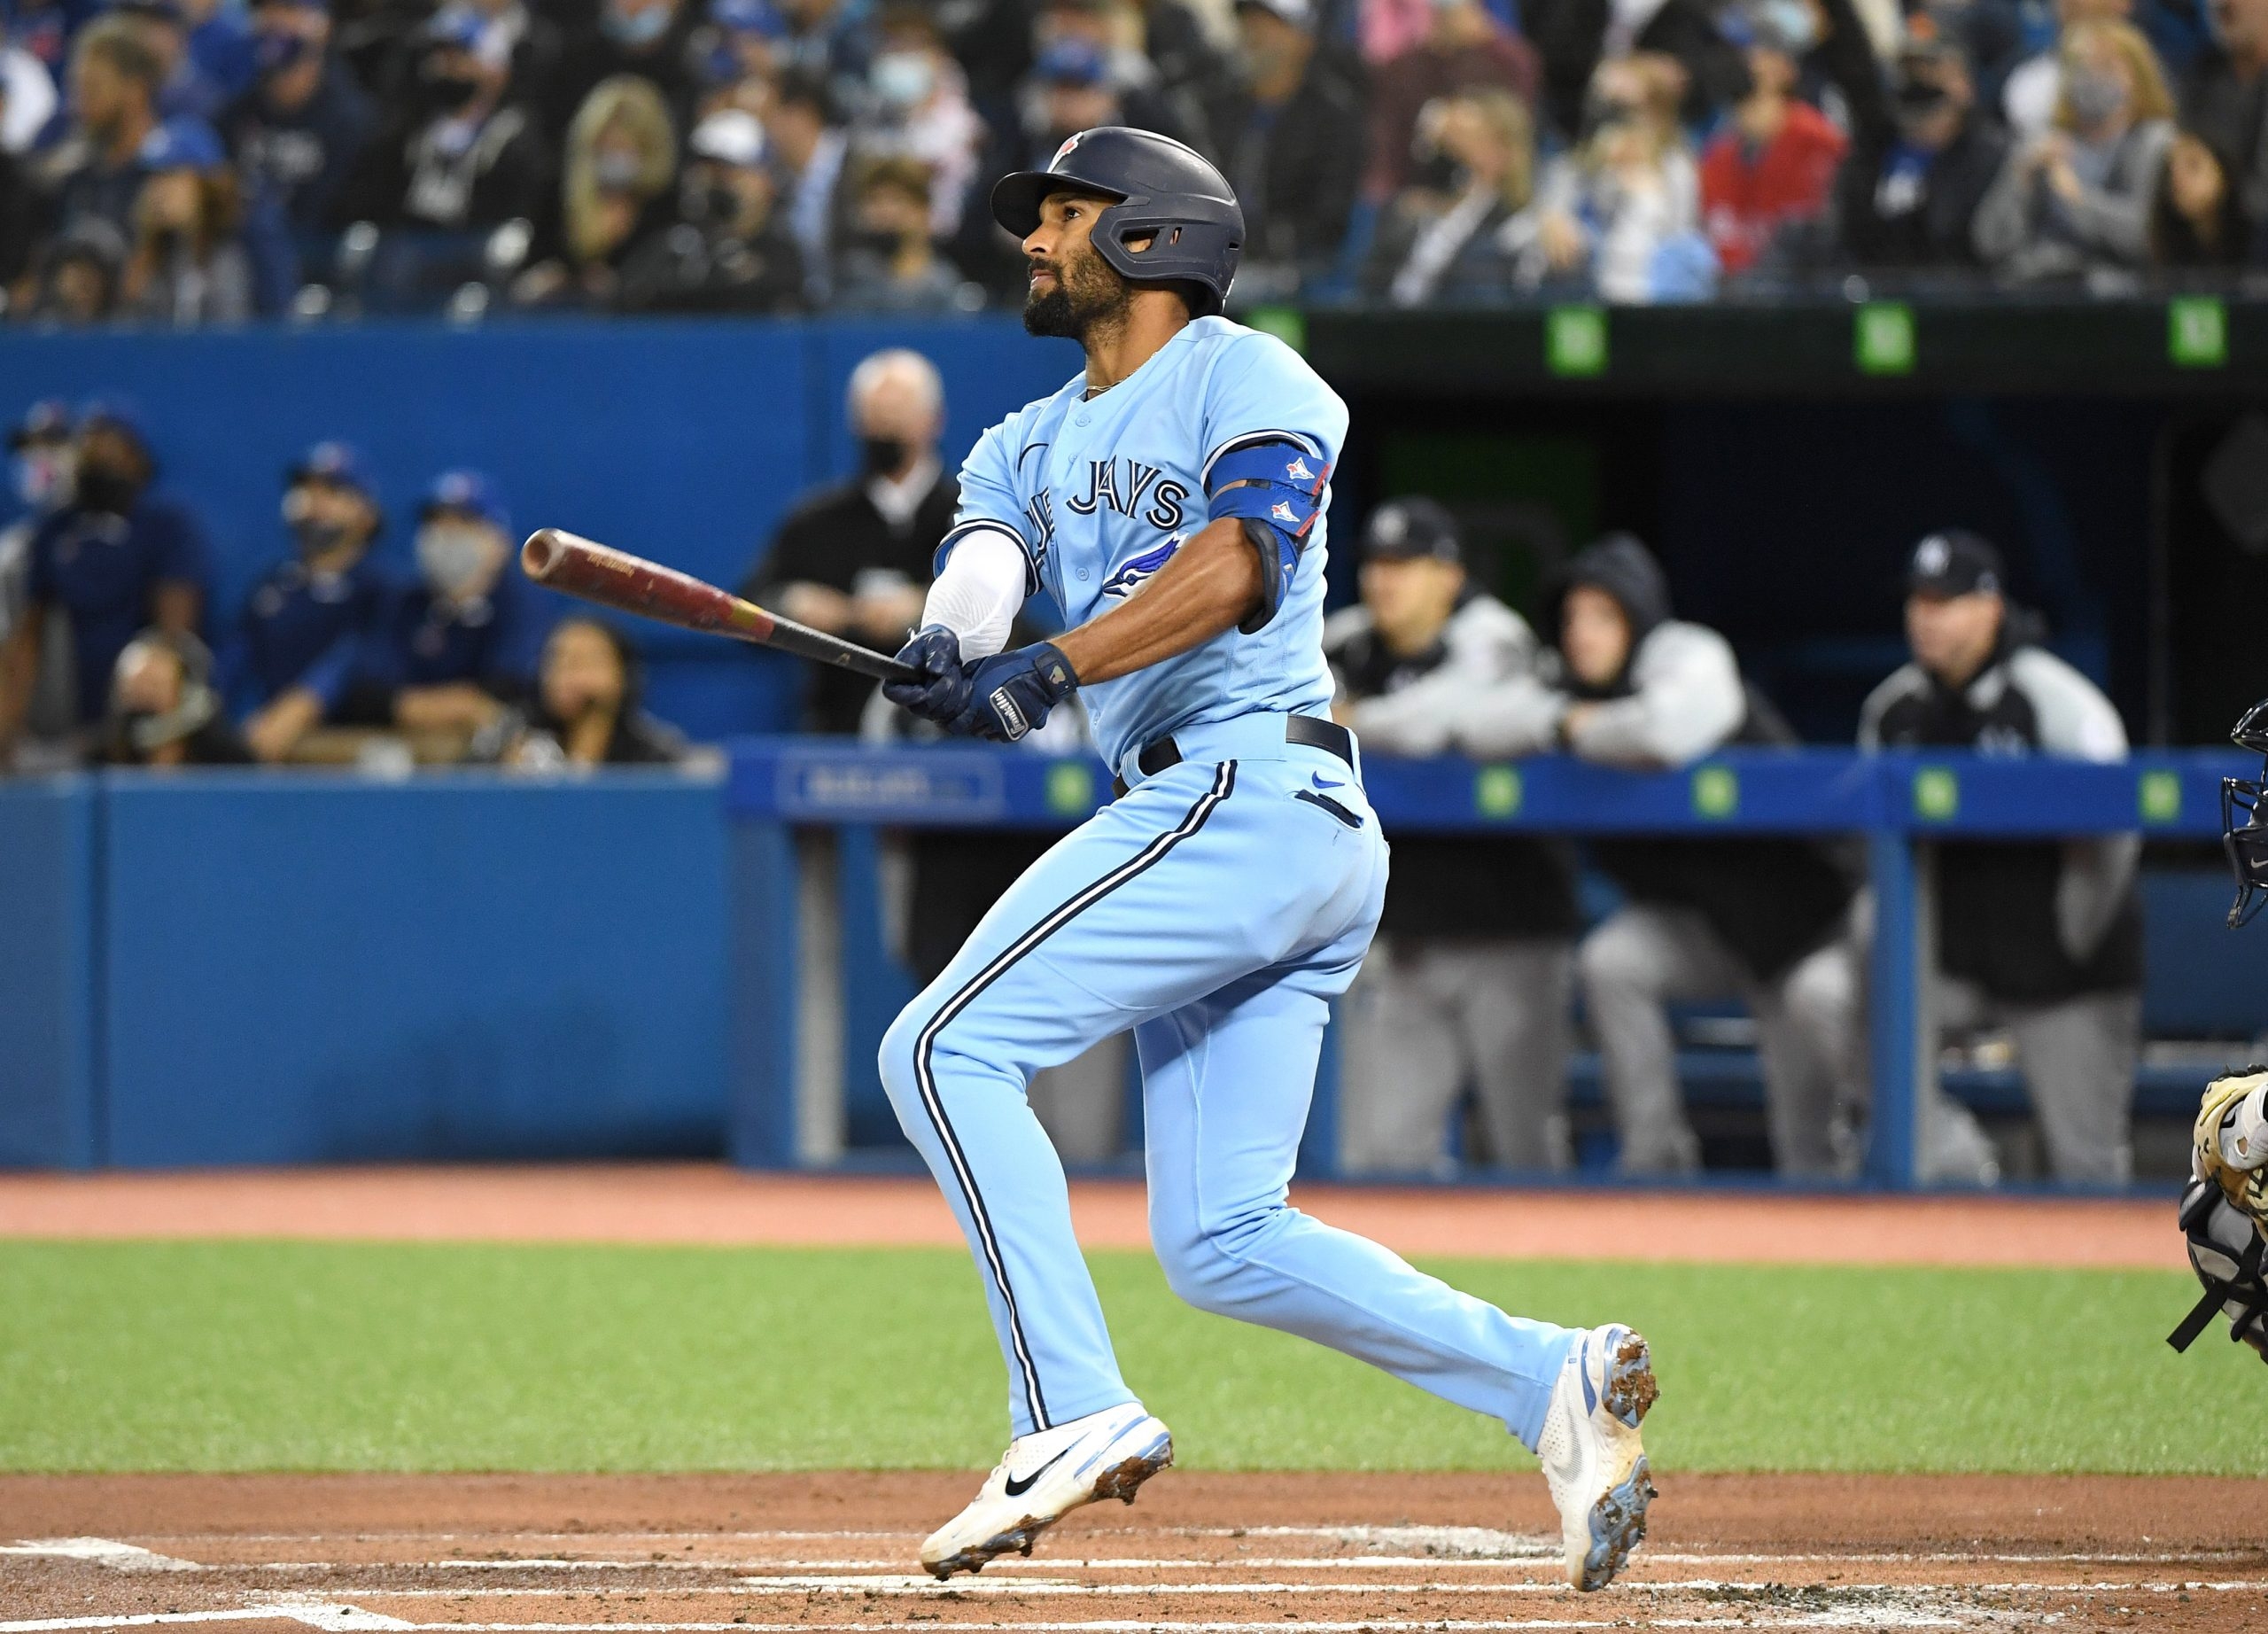 Former A's star Marcus Semien earns All-Star honors with Blue Jays